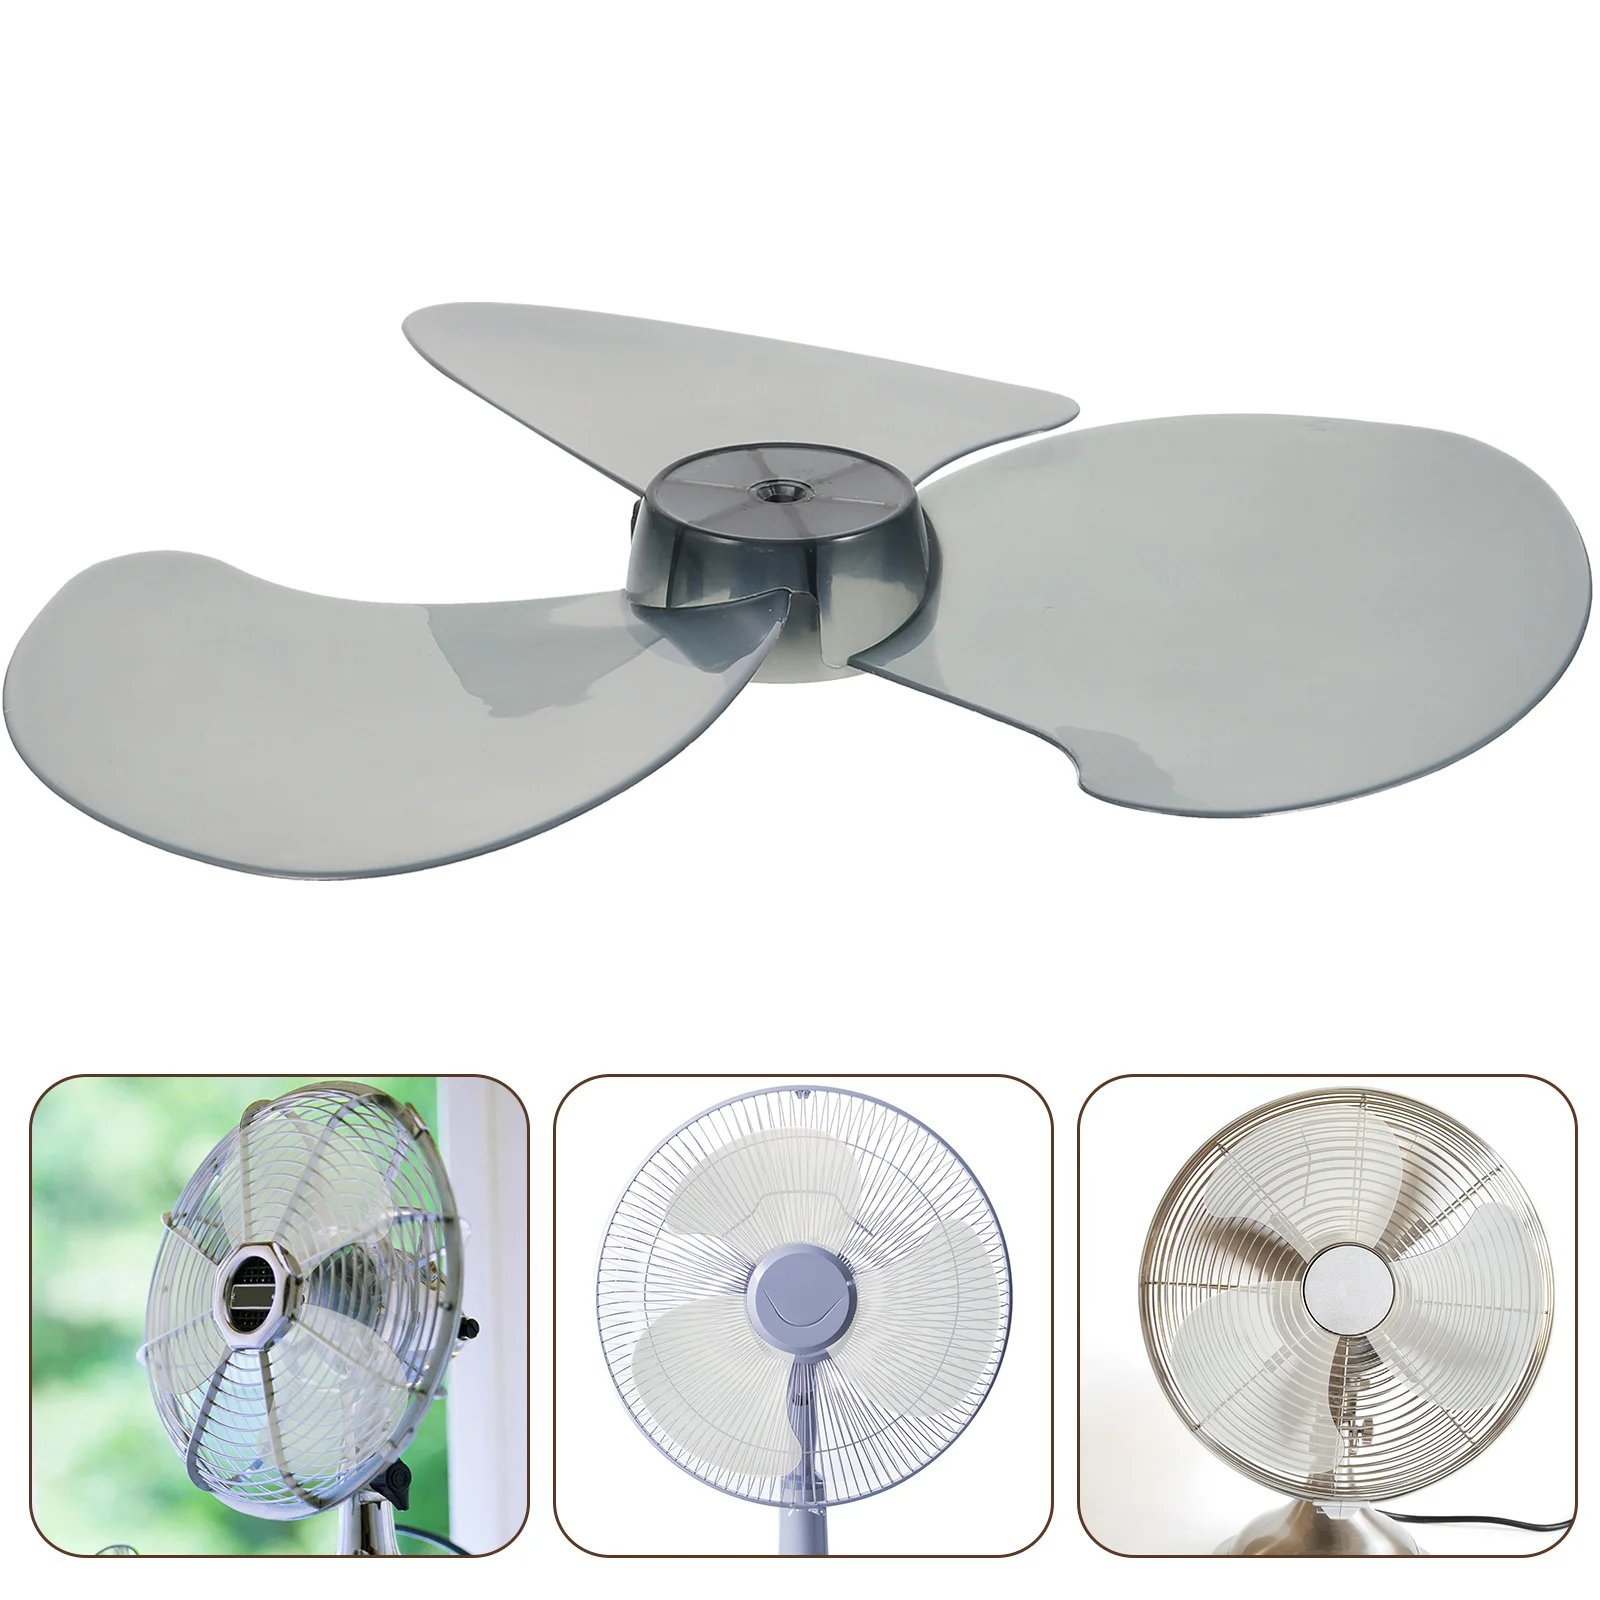 

Fan Blade Blades Supply Standing Pedestal Electric Table 16" Repair Parts Floor Fans Component